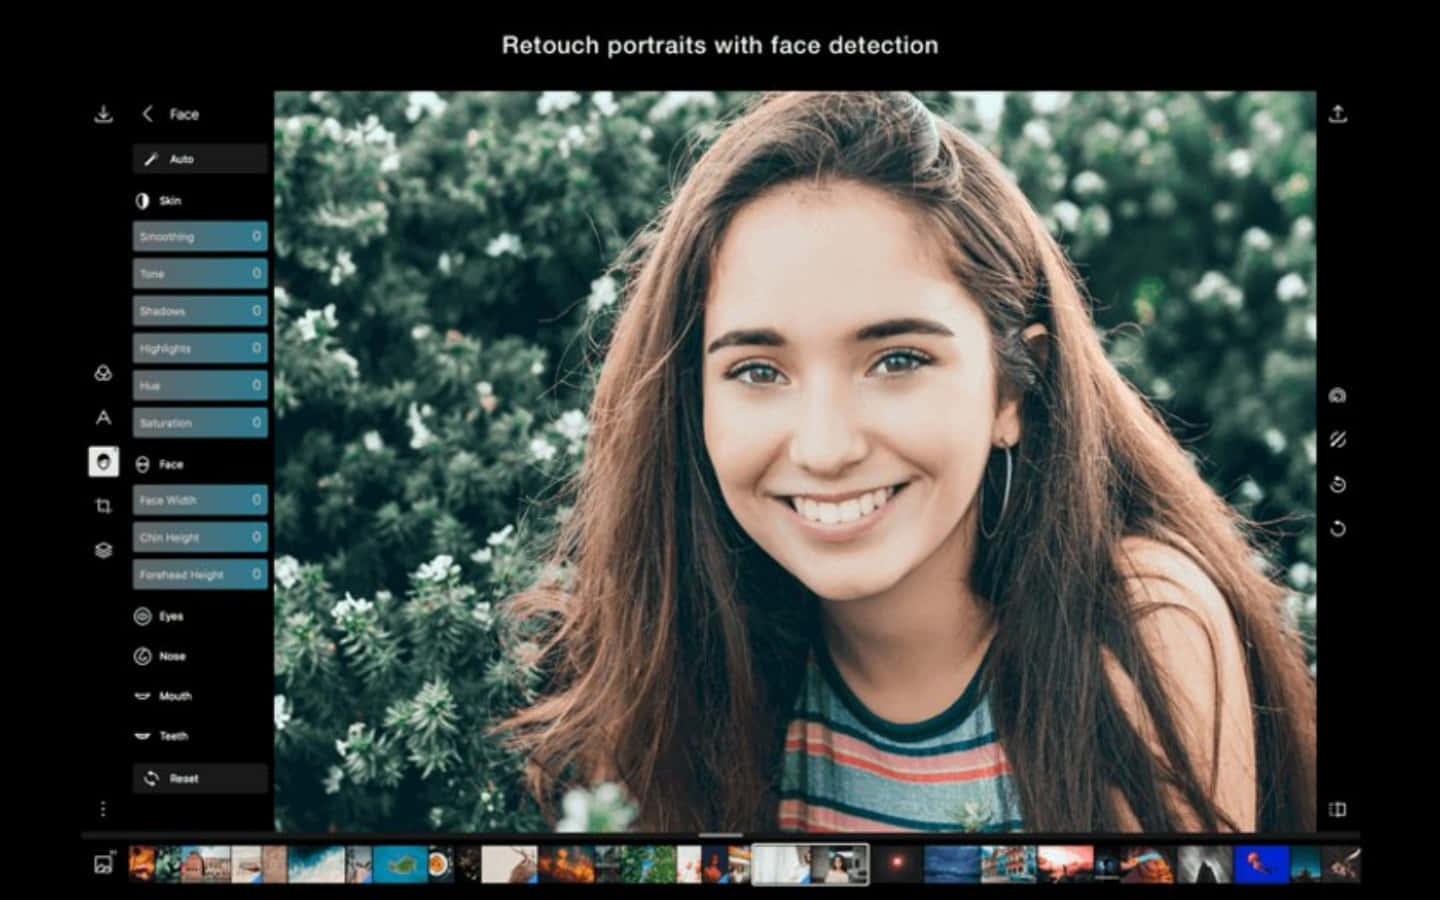 A Photo Of A Girl Smiling In Front Of A Computer Screen